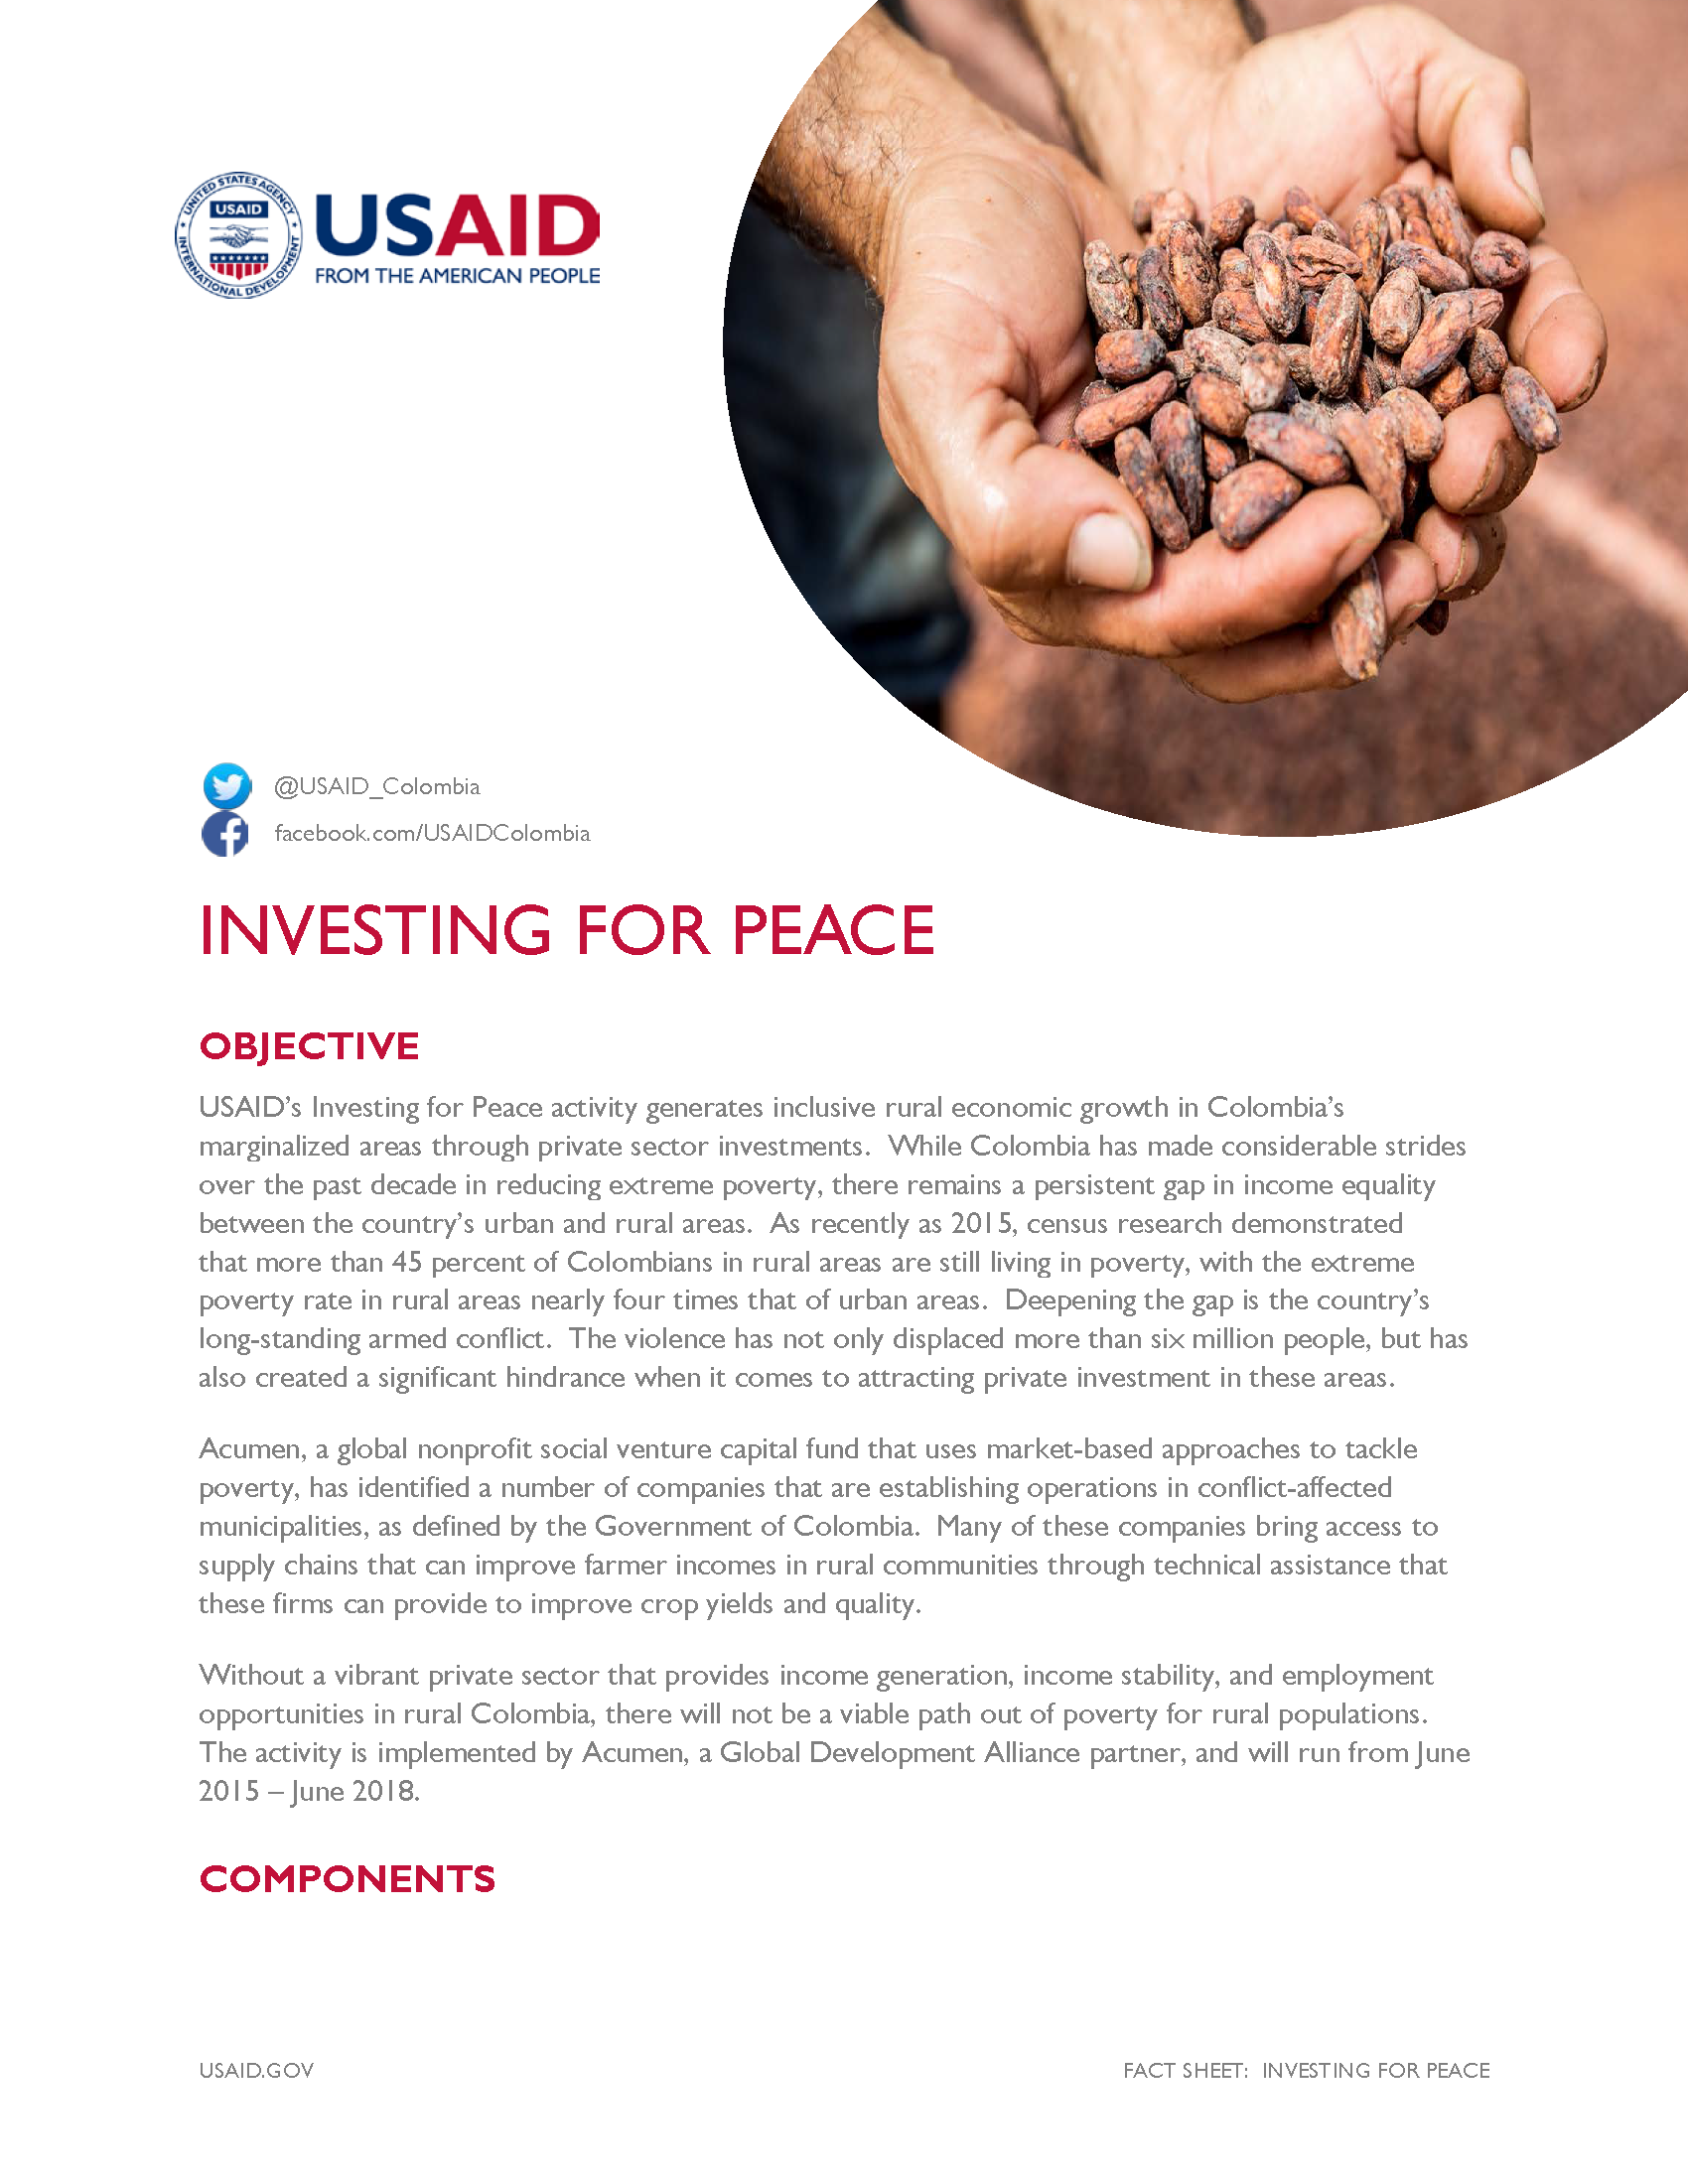 Investing for Peace Fact Sheet